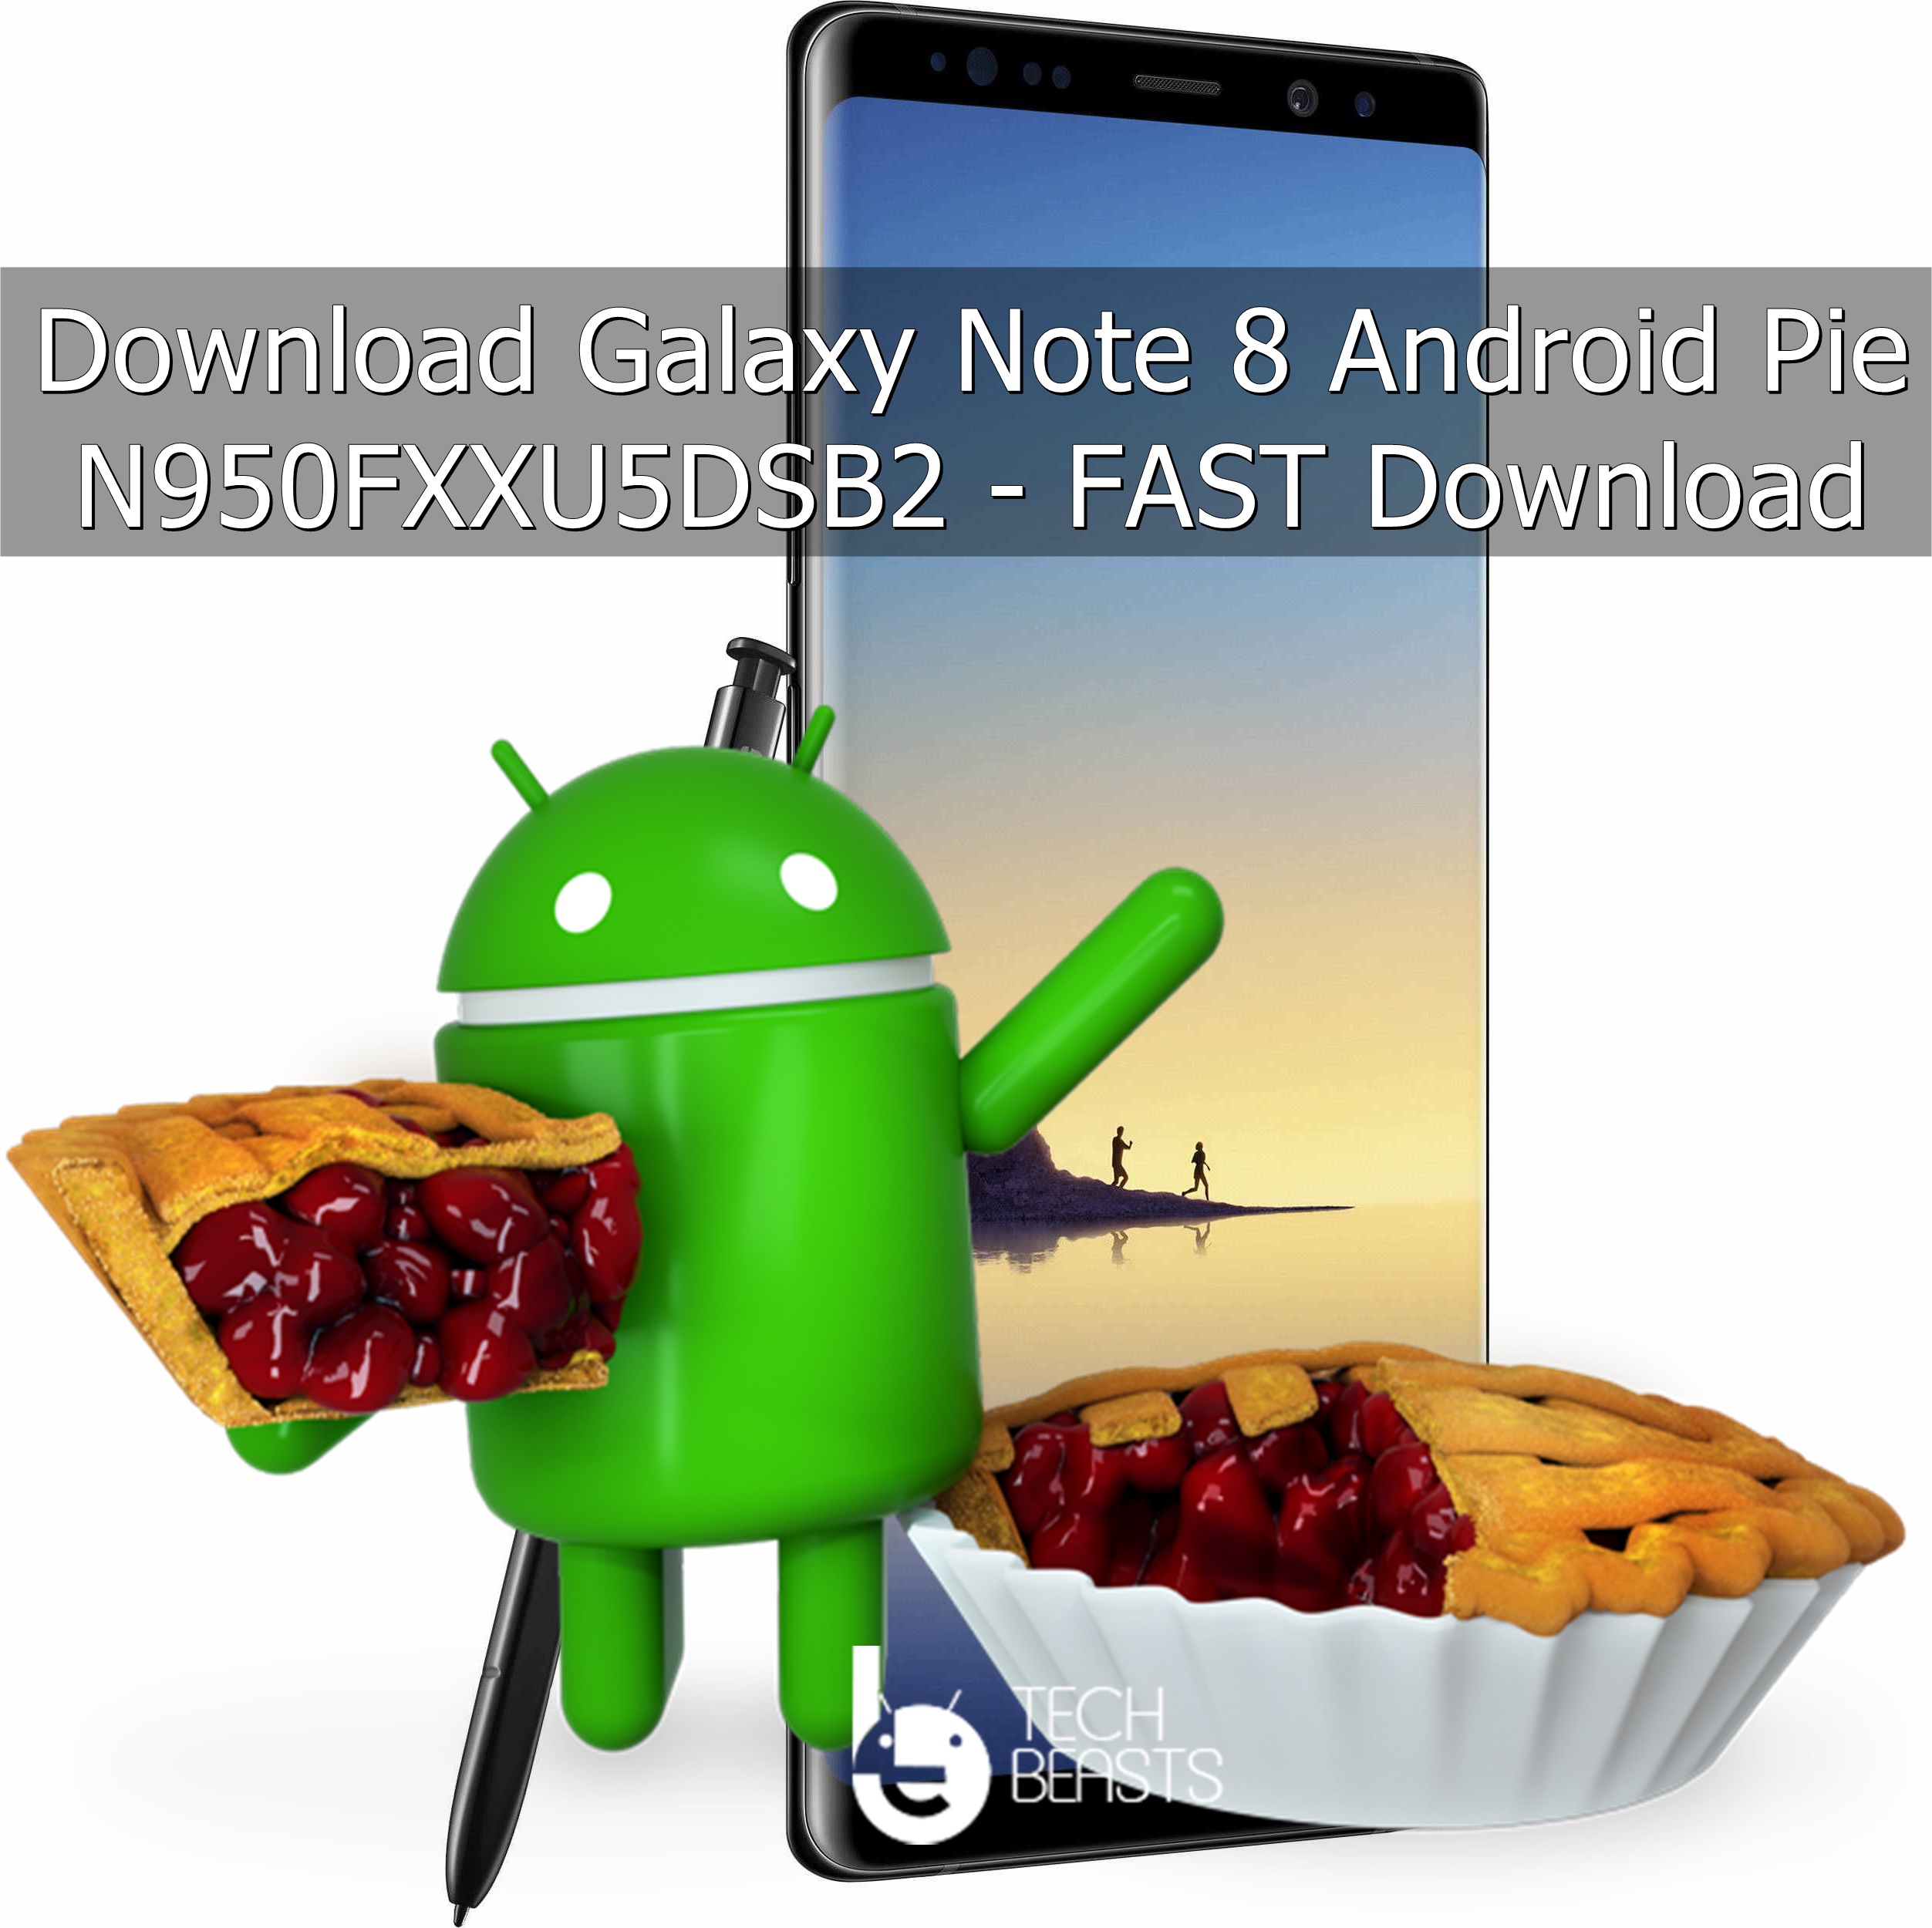 Download Galaxy Note 8 Android Pie